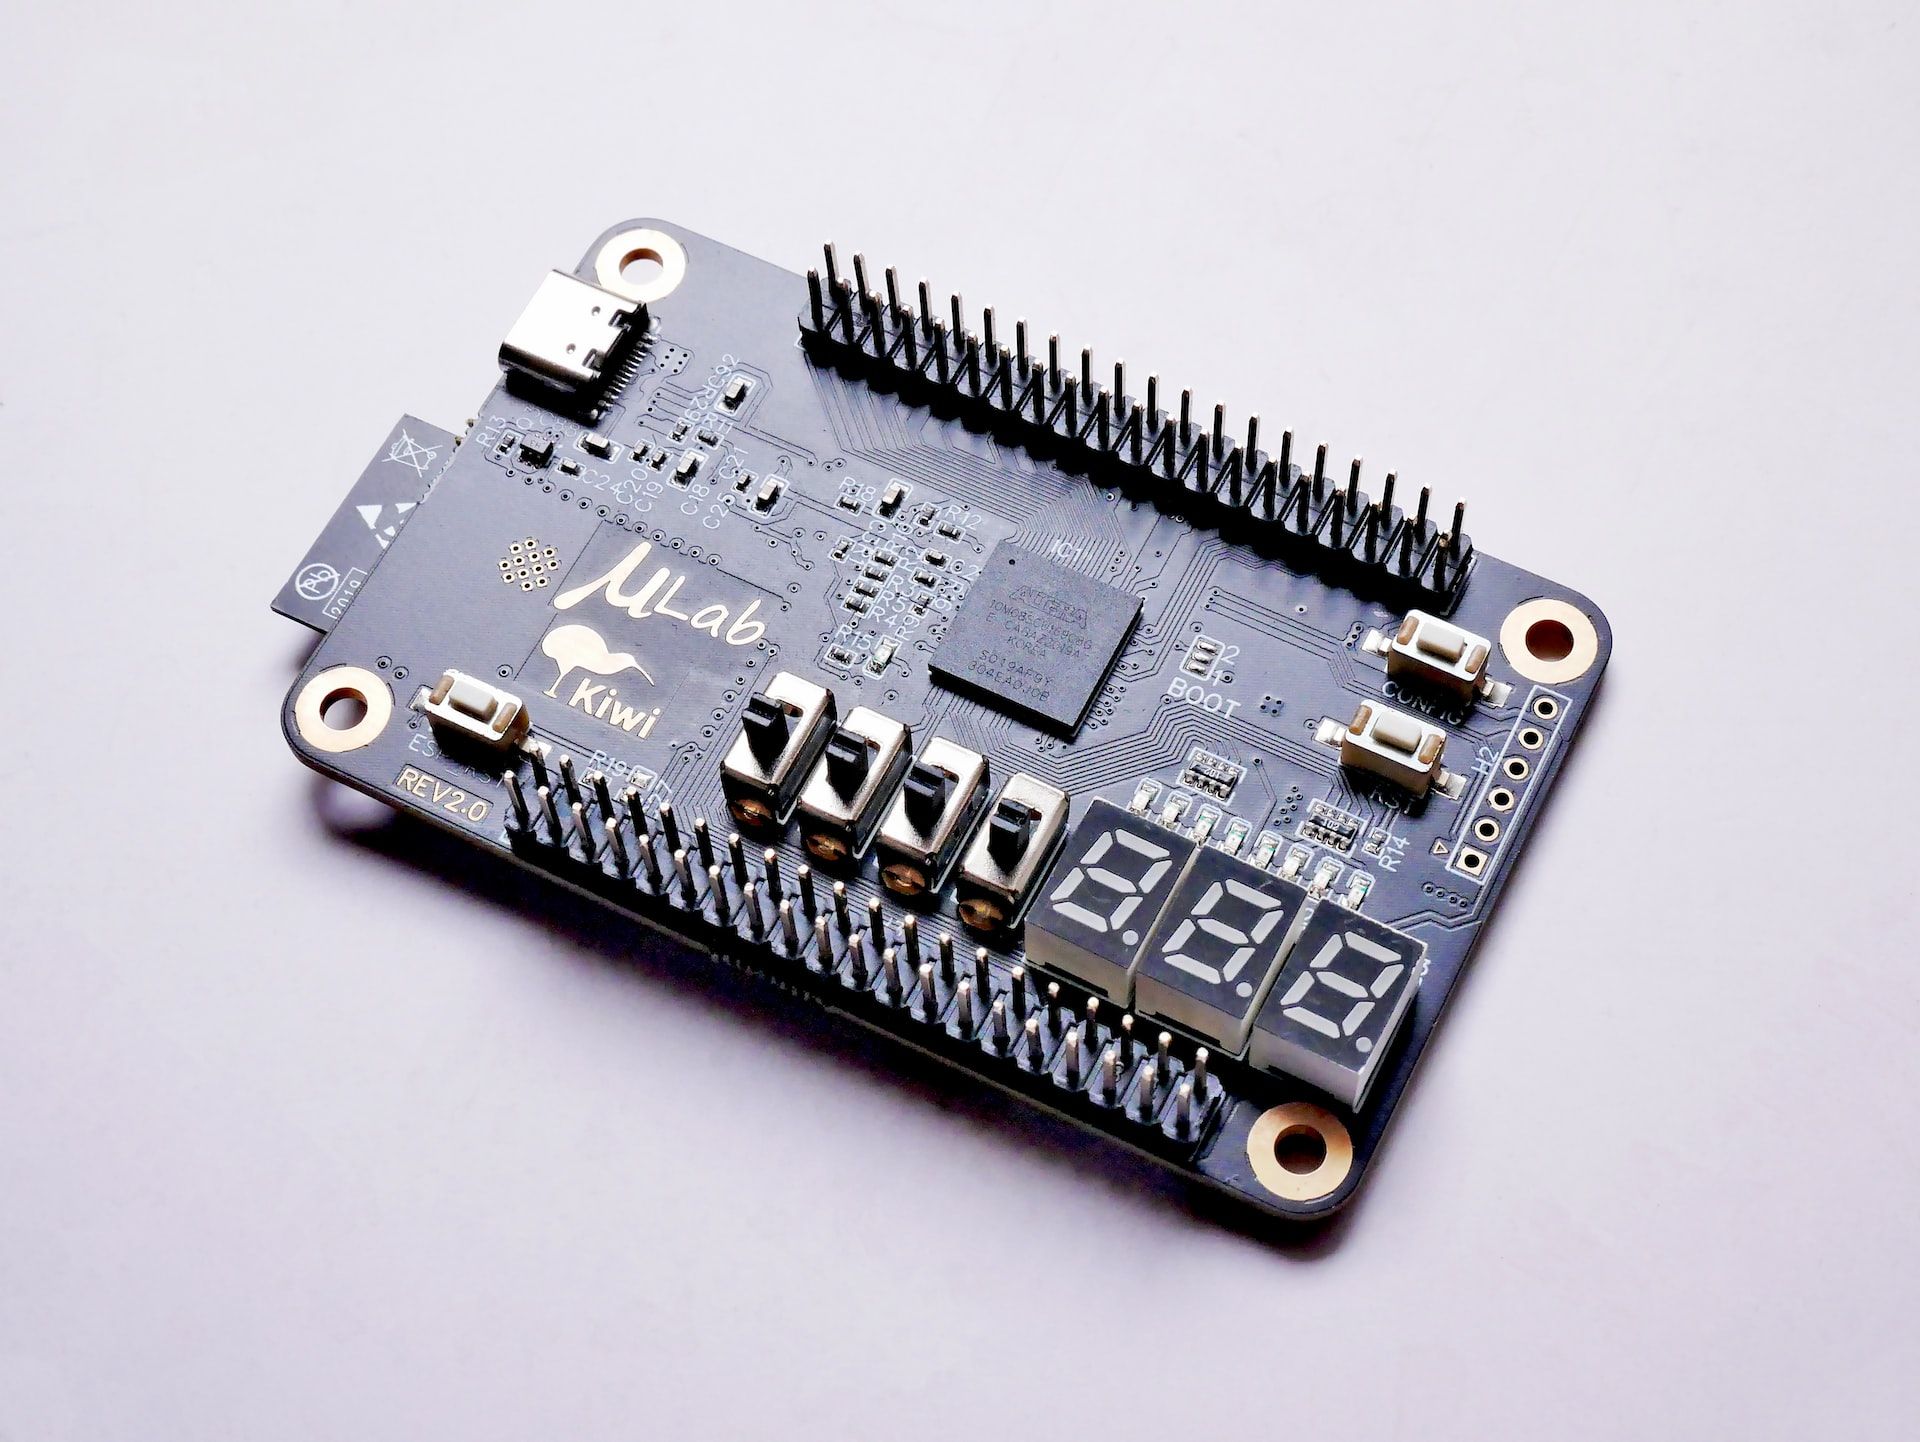 microlab board from Kiwi on a white surface